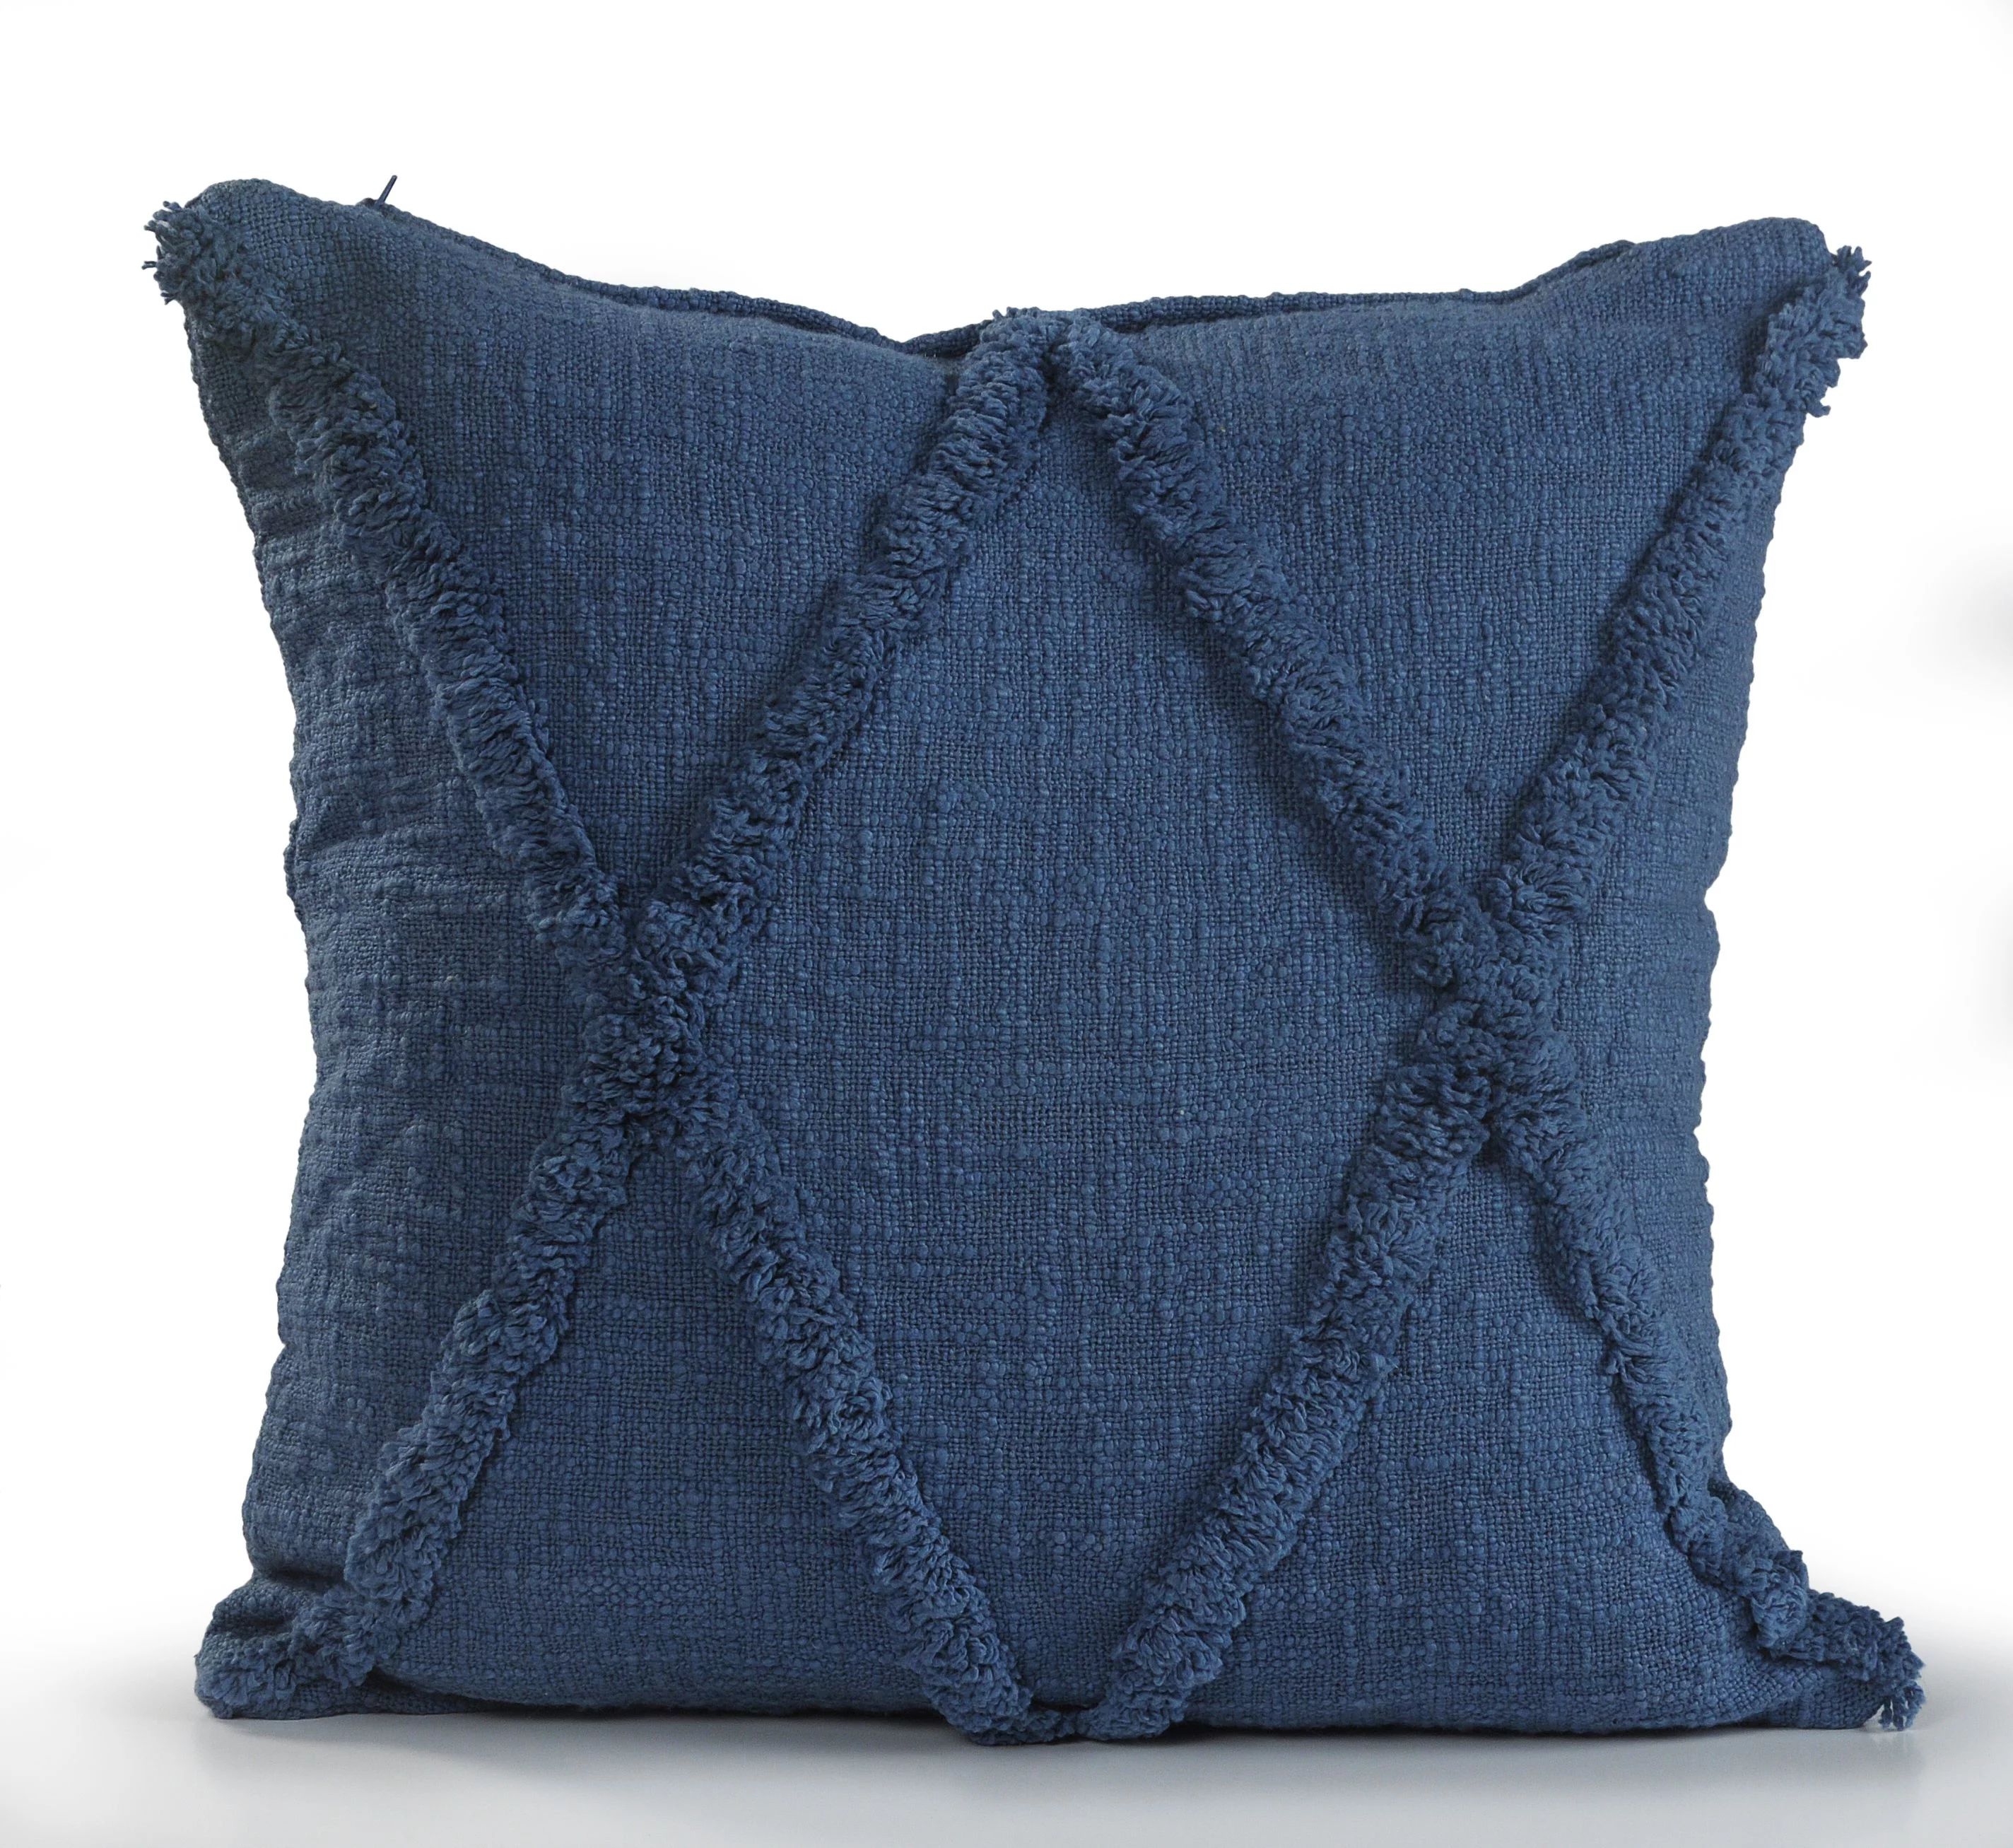 LR Home Tufted Solid Color Cotton Decorative Throw Pillow, 18 inch, Royal Dark Blue | Walmart (US)